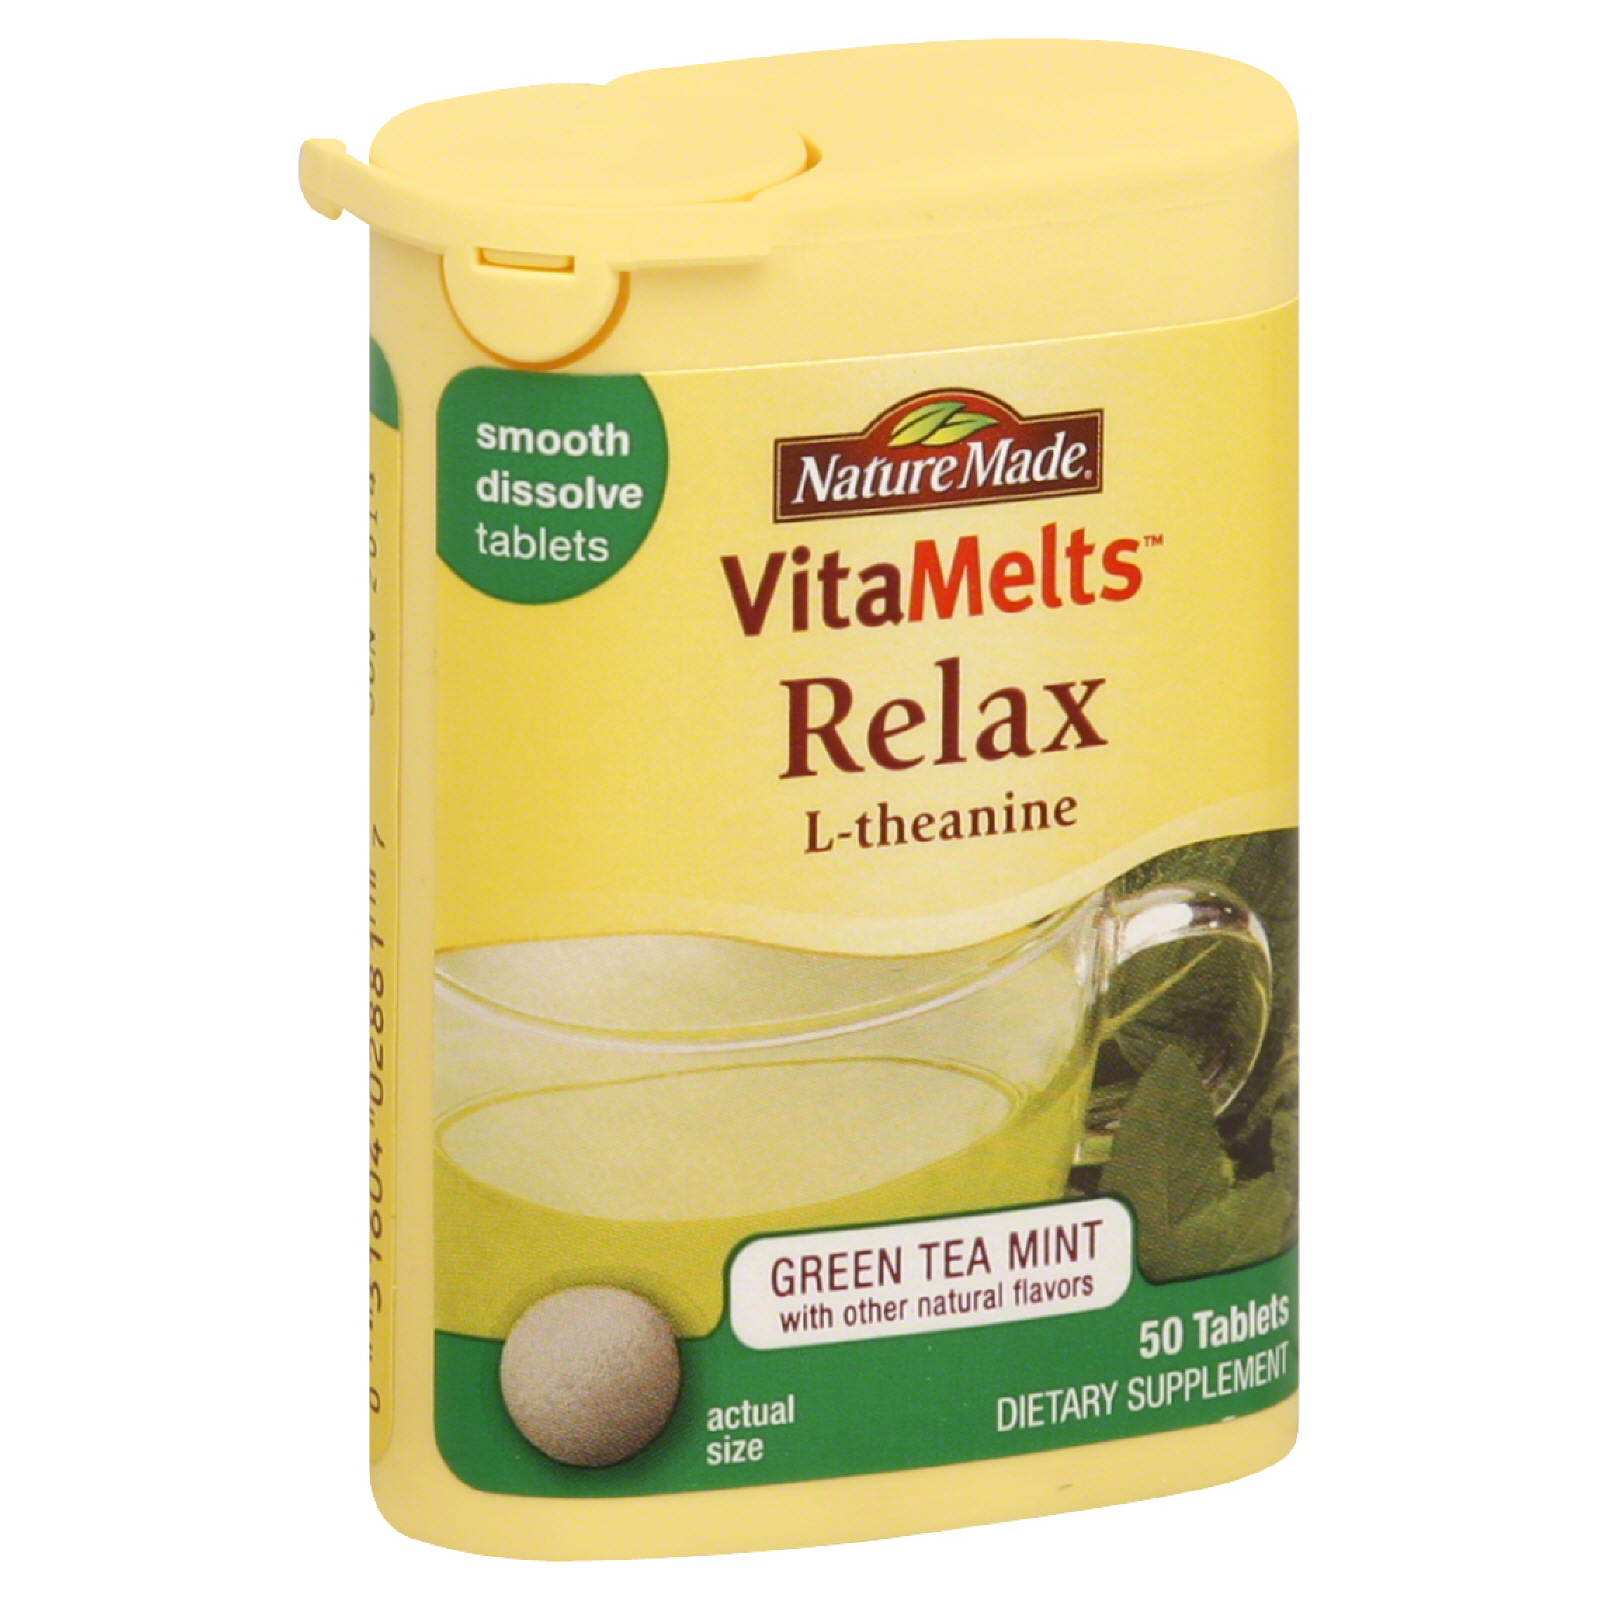 Nature Made VitaMelts Relax L-Theanine Green Tea Mint Dietary Supplement Tablets - 50 ct.